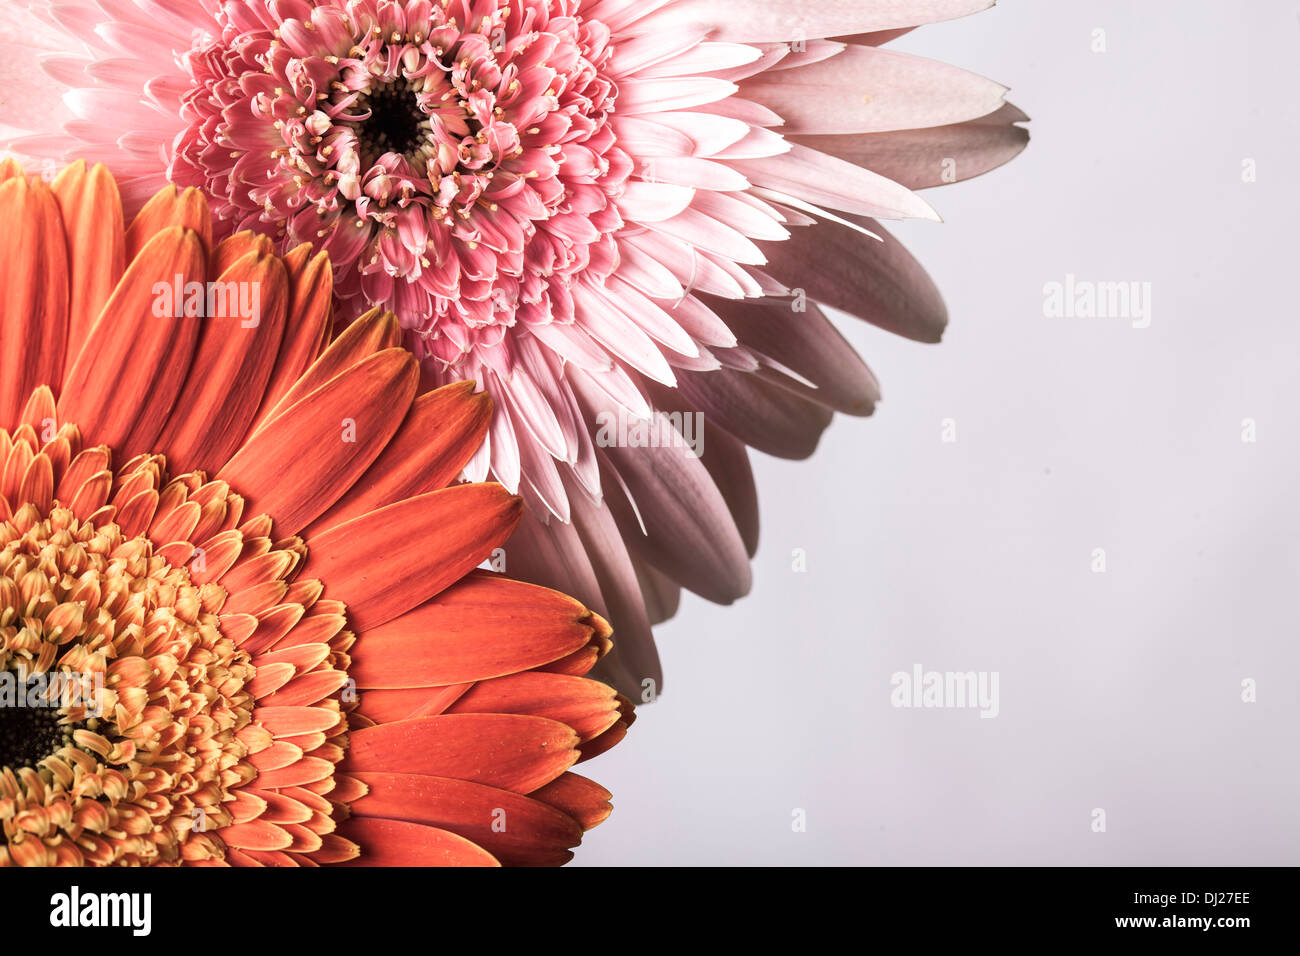 Beautiful pink and orange gerber daisies on white background Stock Photo